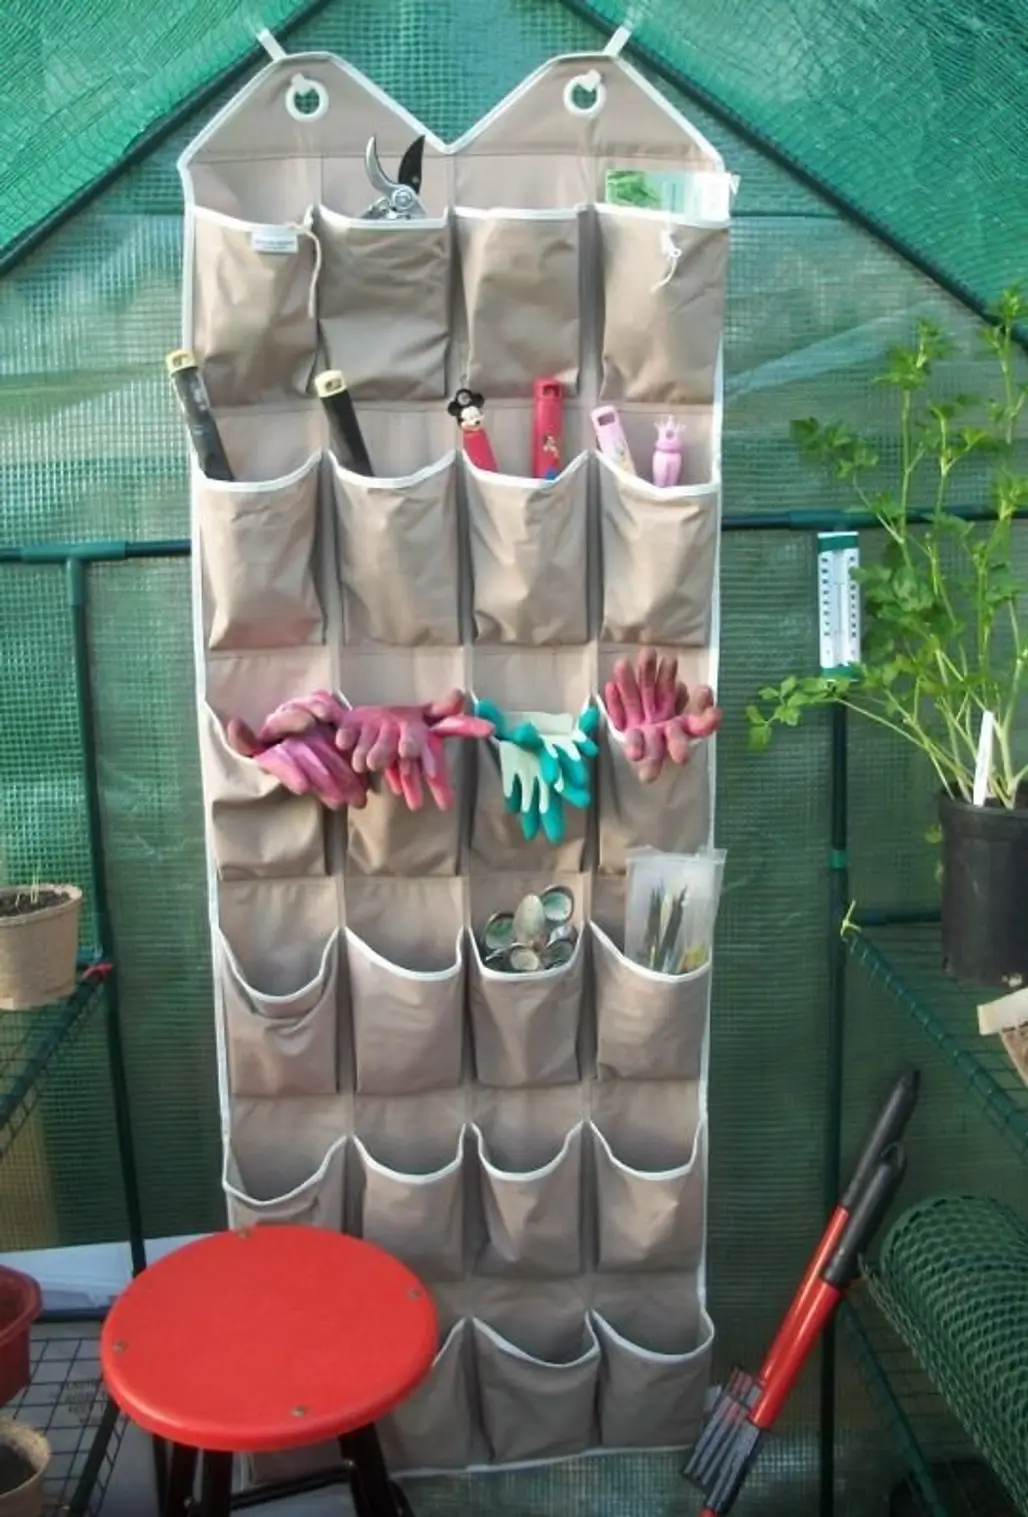 Reuse an Old Shoe Organizer to Store Small Gardening Tools